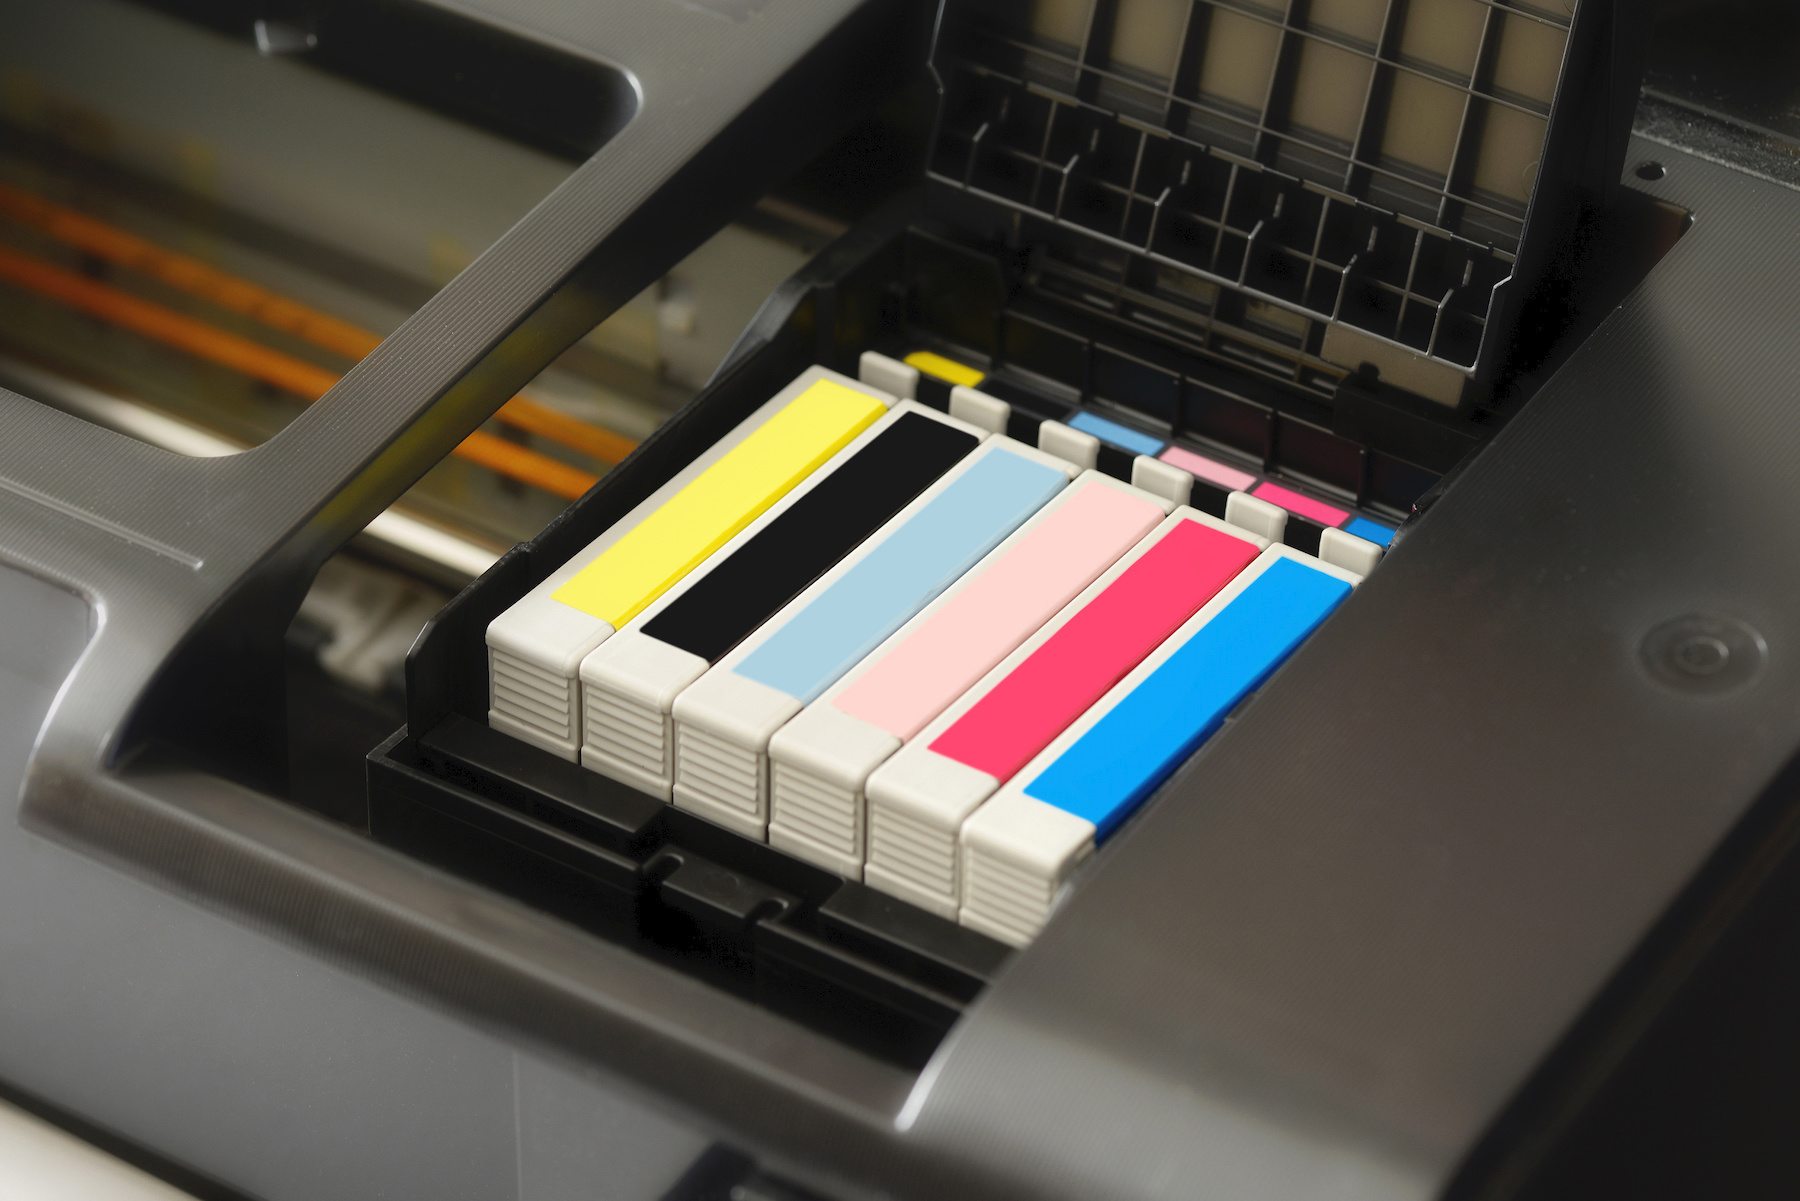 Row of individual ink cartridges in a printer